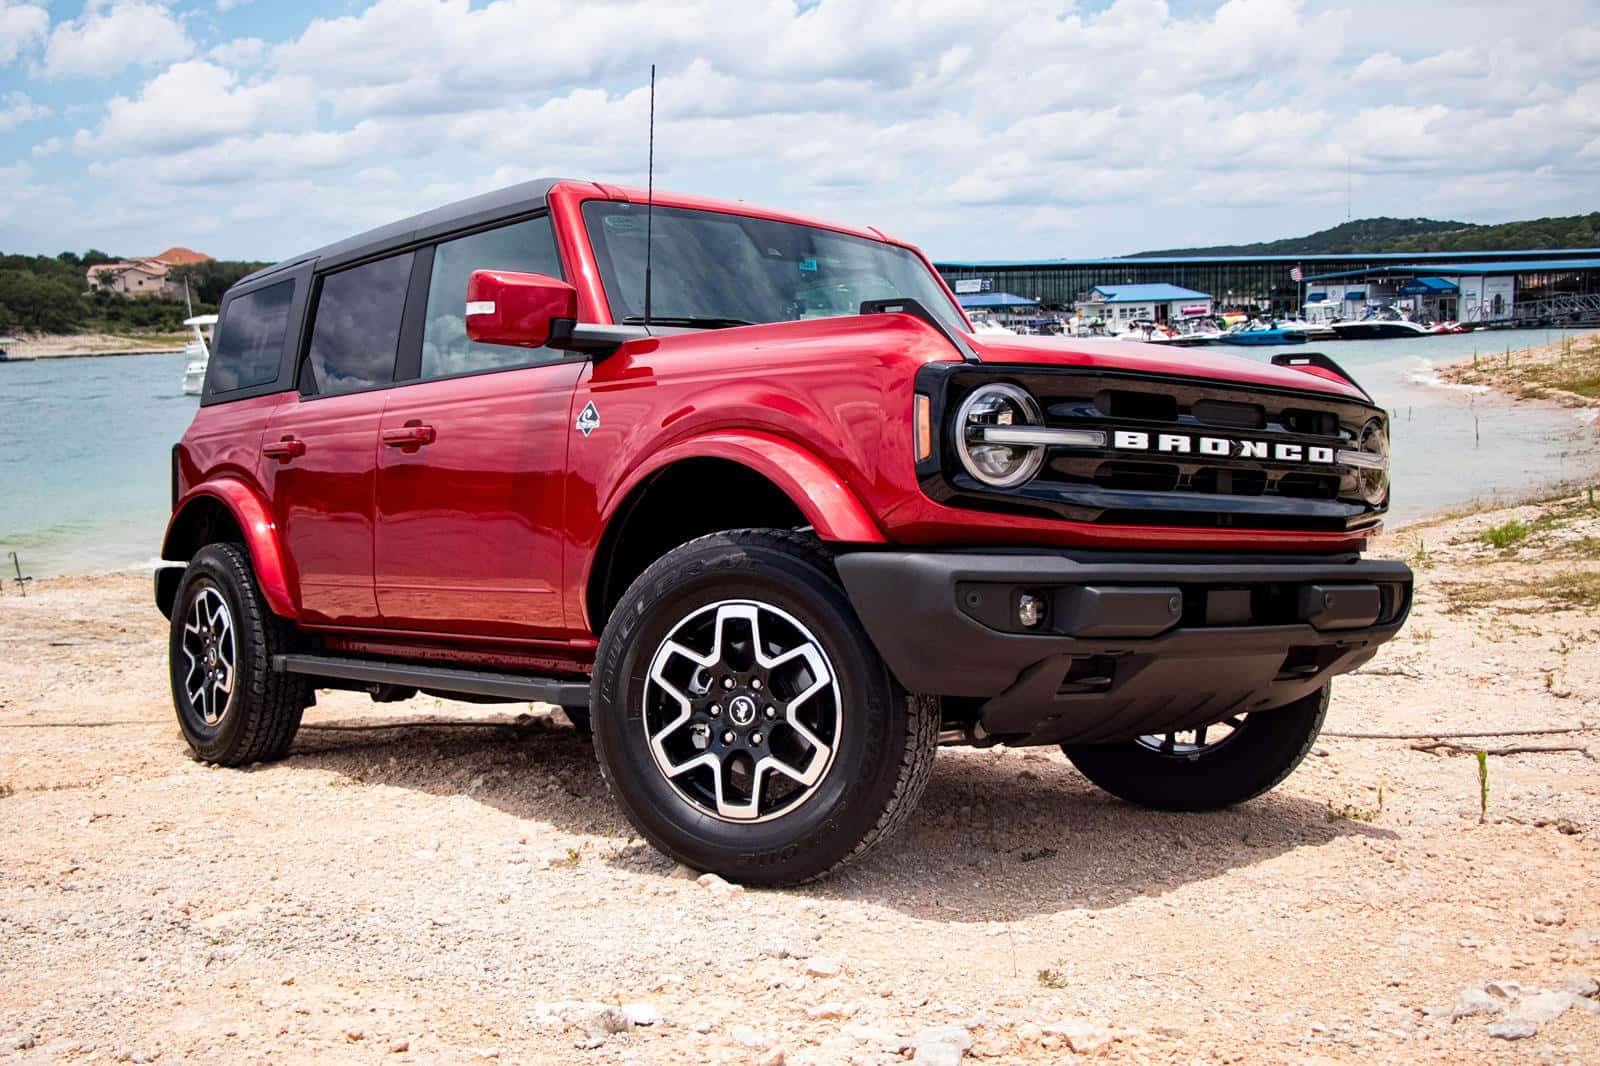 The Red 2020 Ford Bronco Is Parked On The Shore